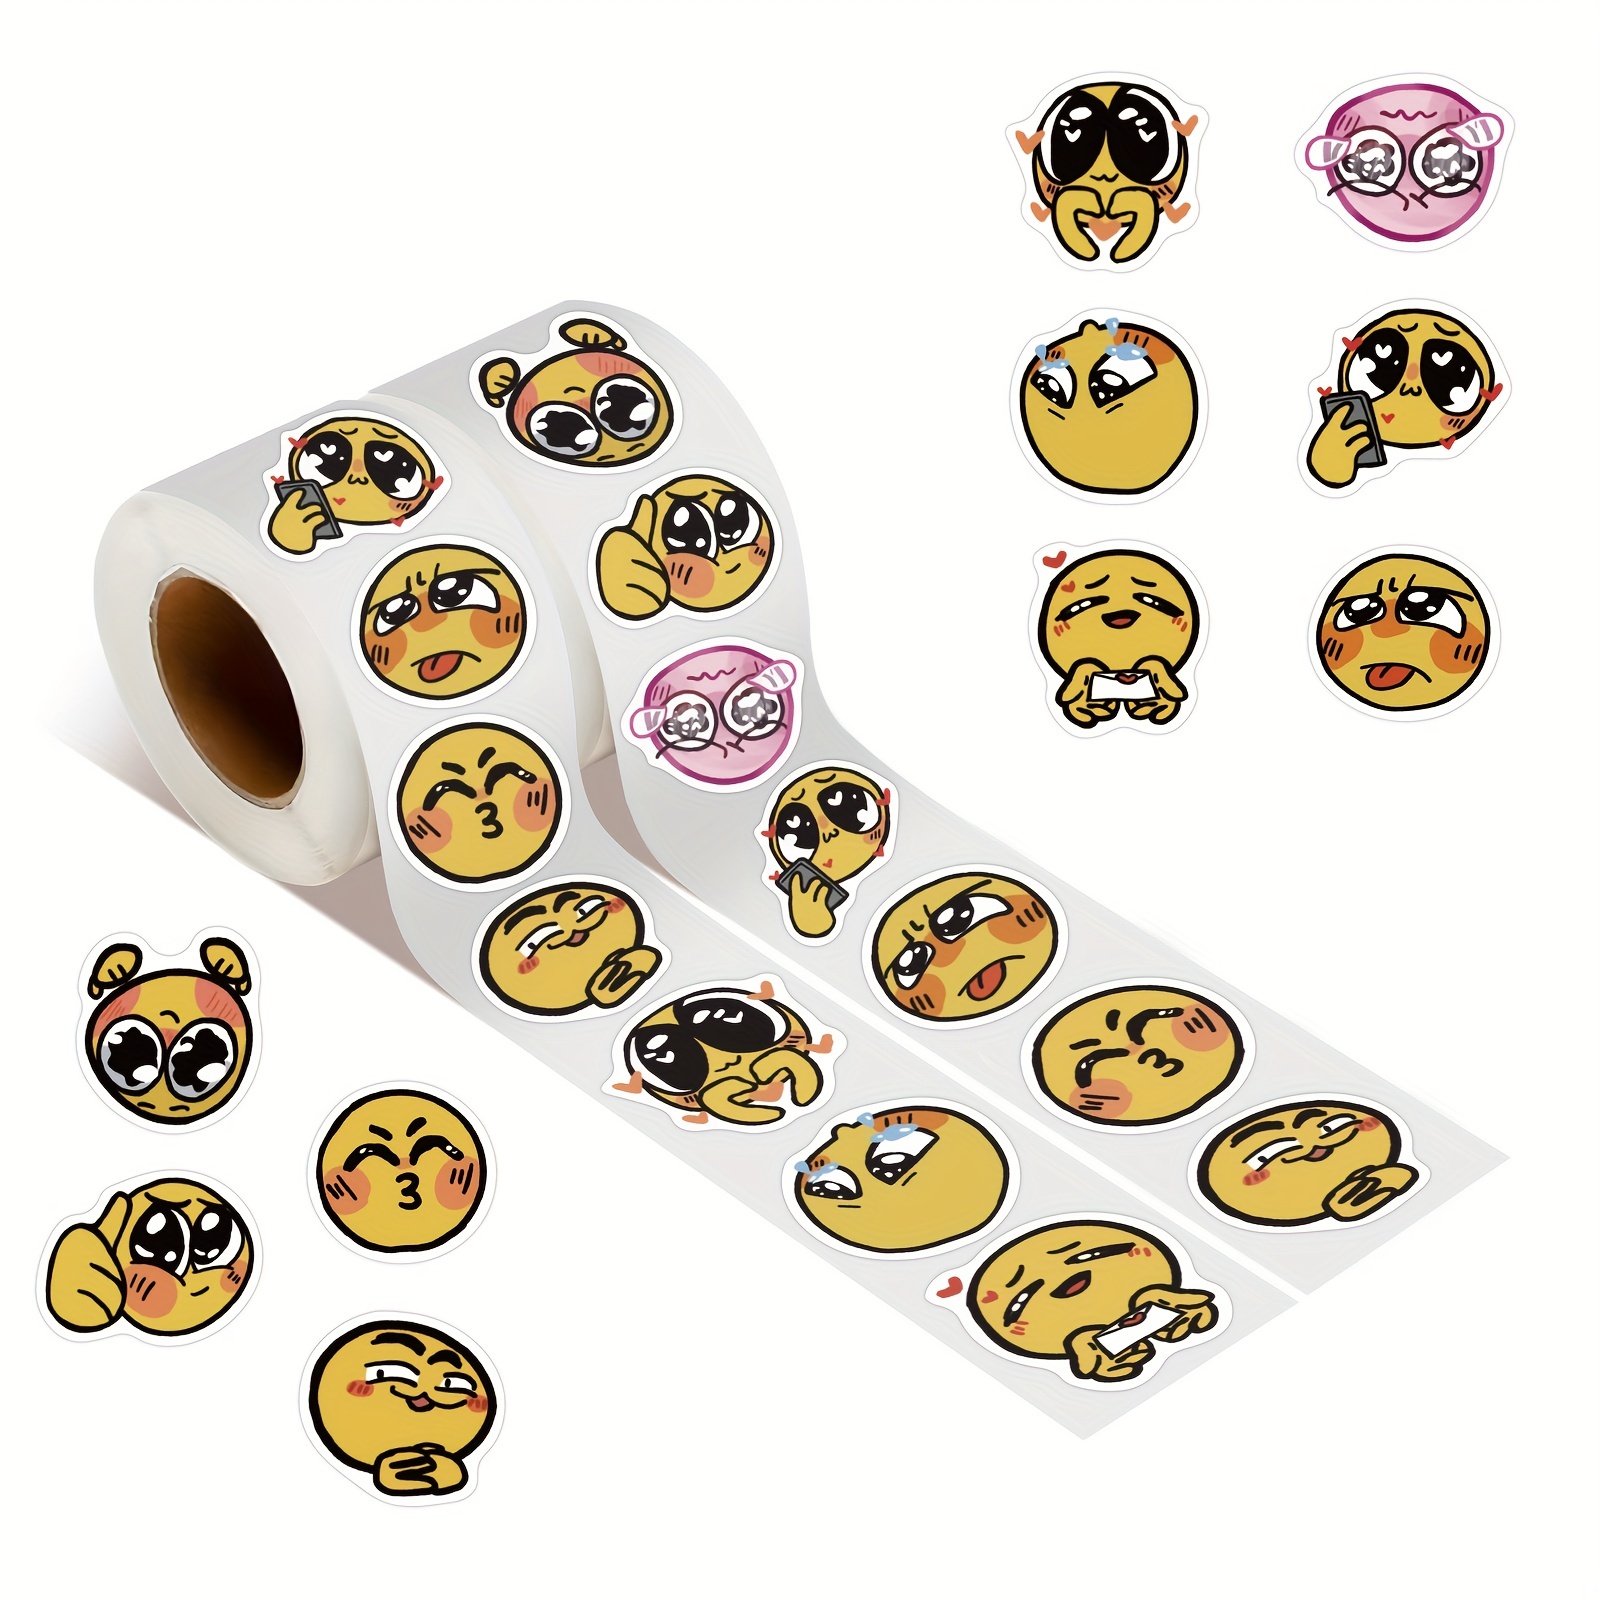 

500pcs Funny Yellow Face Stickers Roll For Laptop, Cute Emotional Waterproof Vinyl Graffiti Decals For Teens Water Bottles Scrapbook Notebook Phone Car Skateboard Luggage